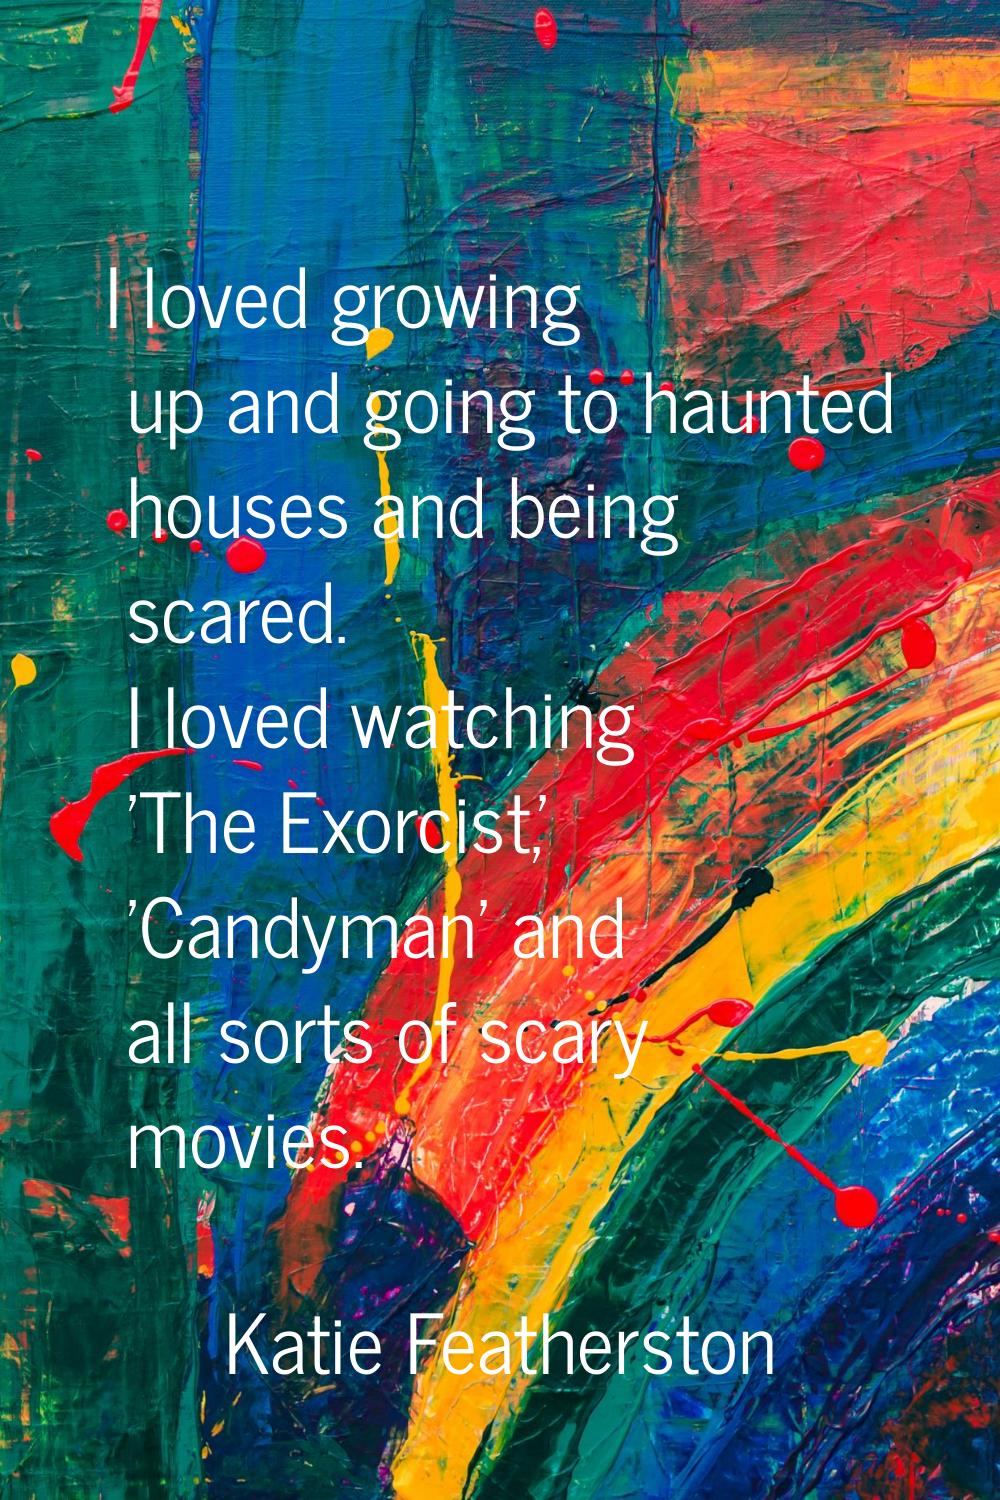 I loved growing up and going to haunted houses and being scared. I loved watching 'The Exorcist,' '